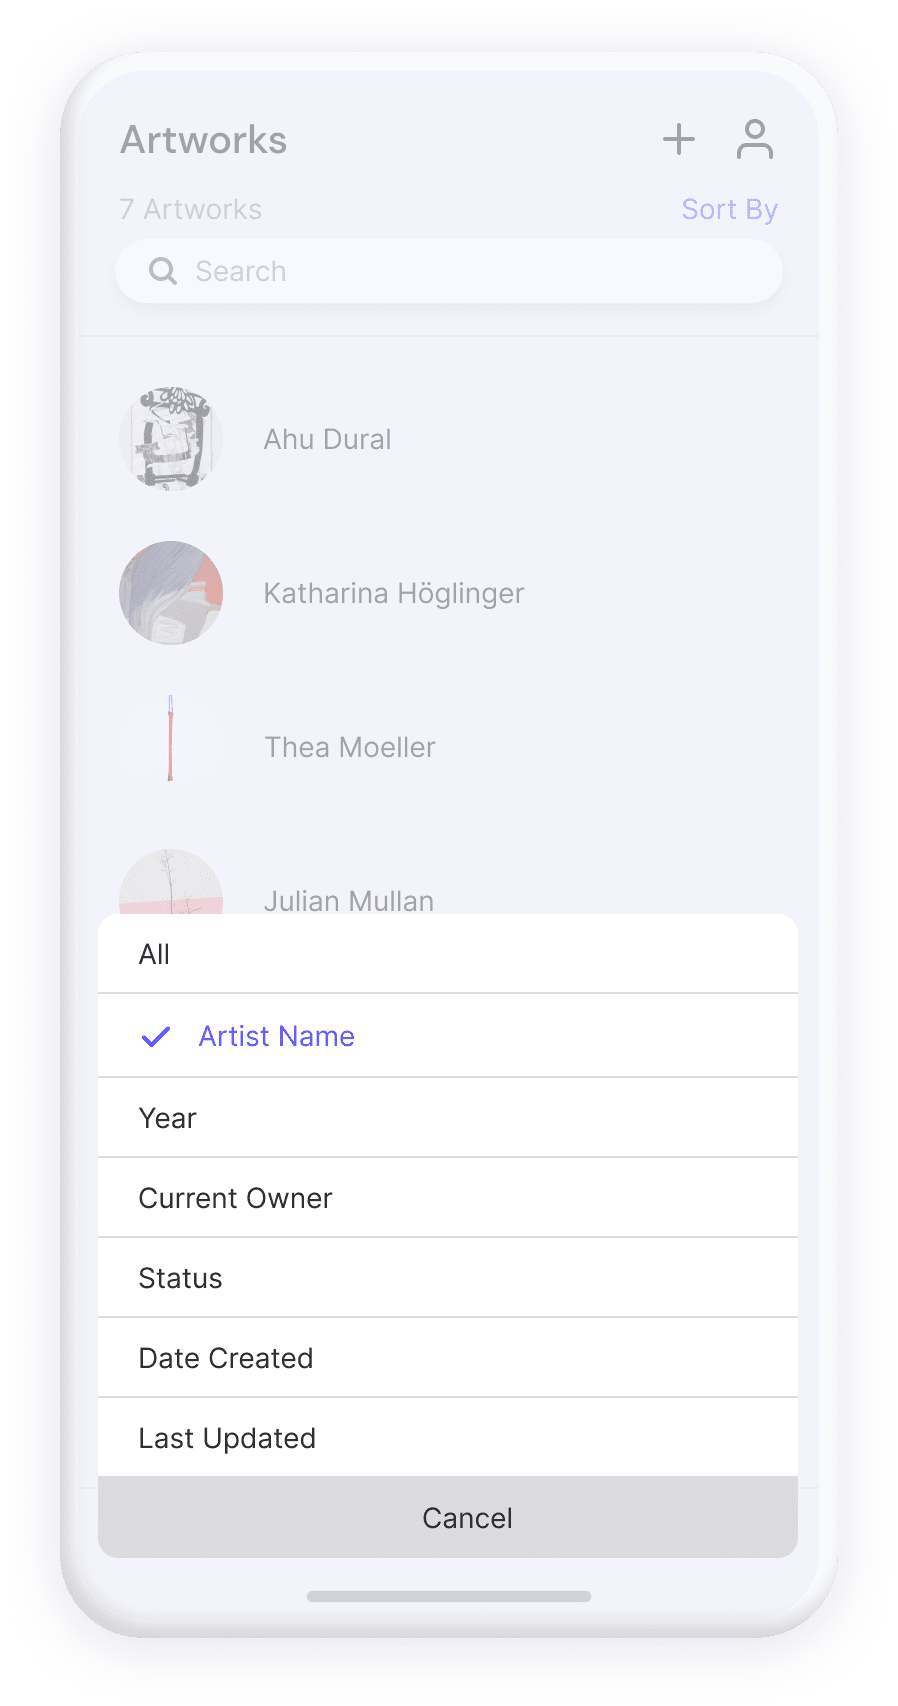 Filter options in a mobile app.